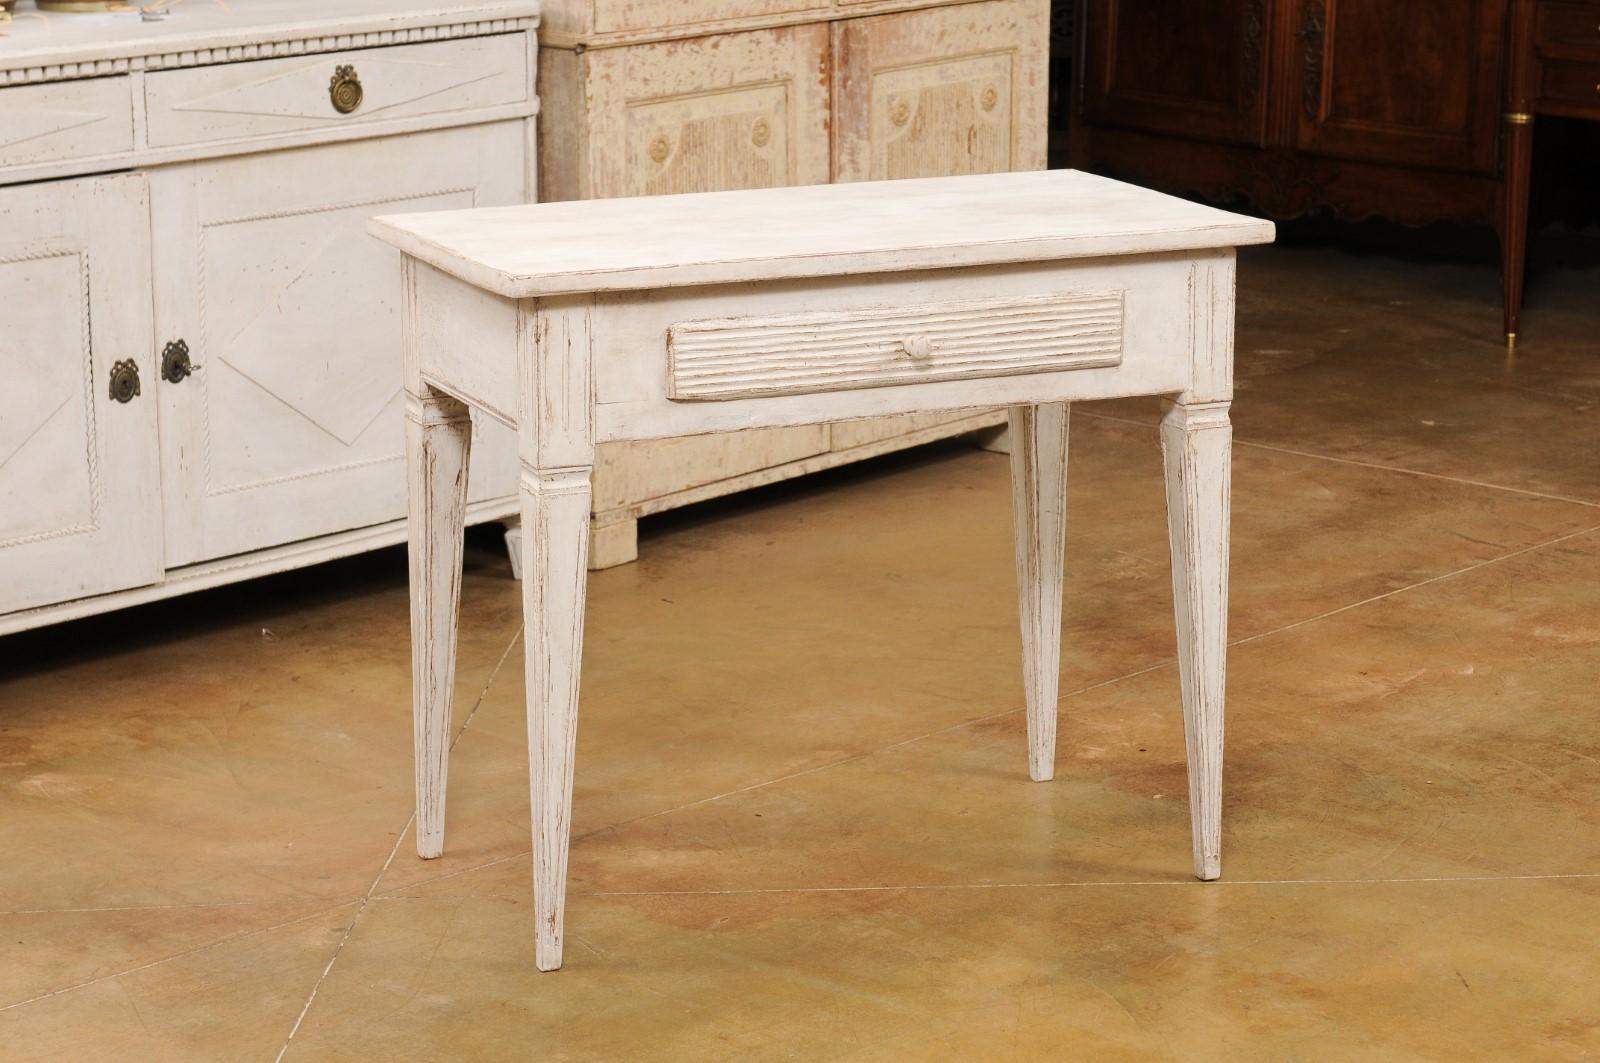 Carved Swedish Gustavian Style Painted Side Table with Reeded Drawer and Tapered Legs